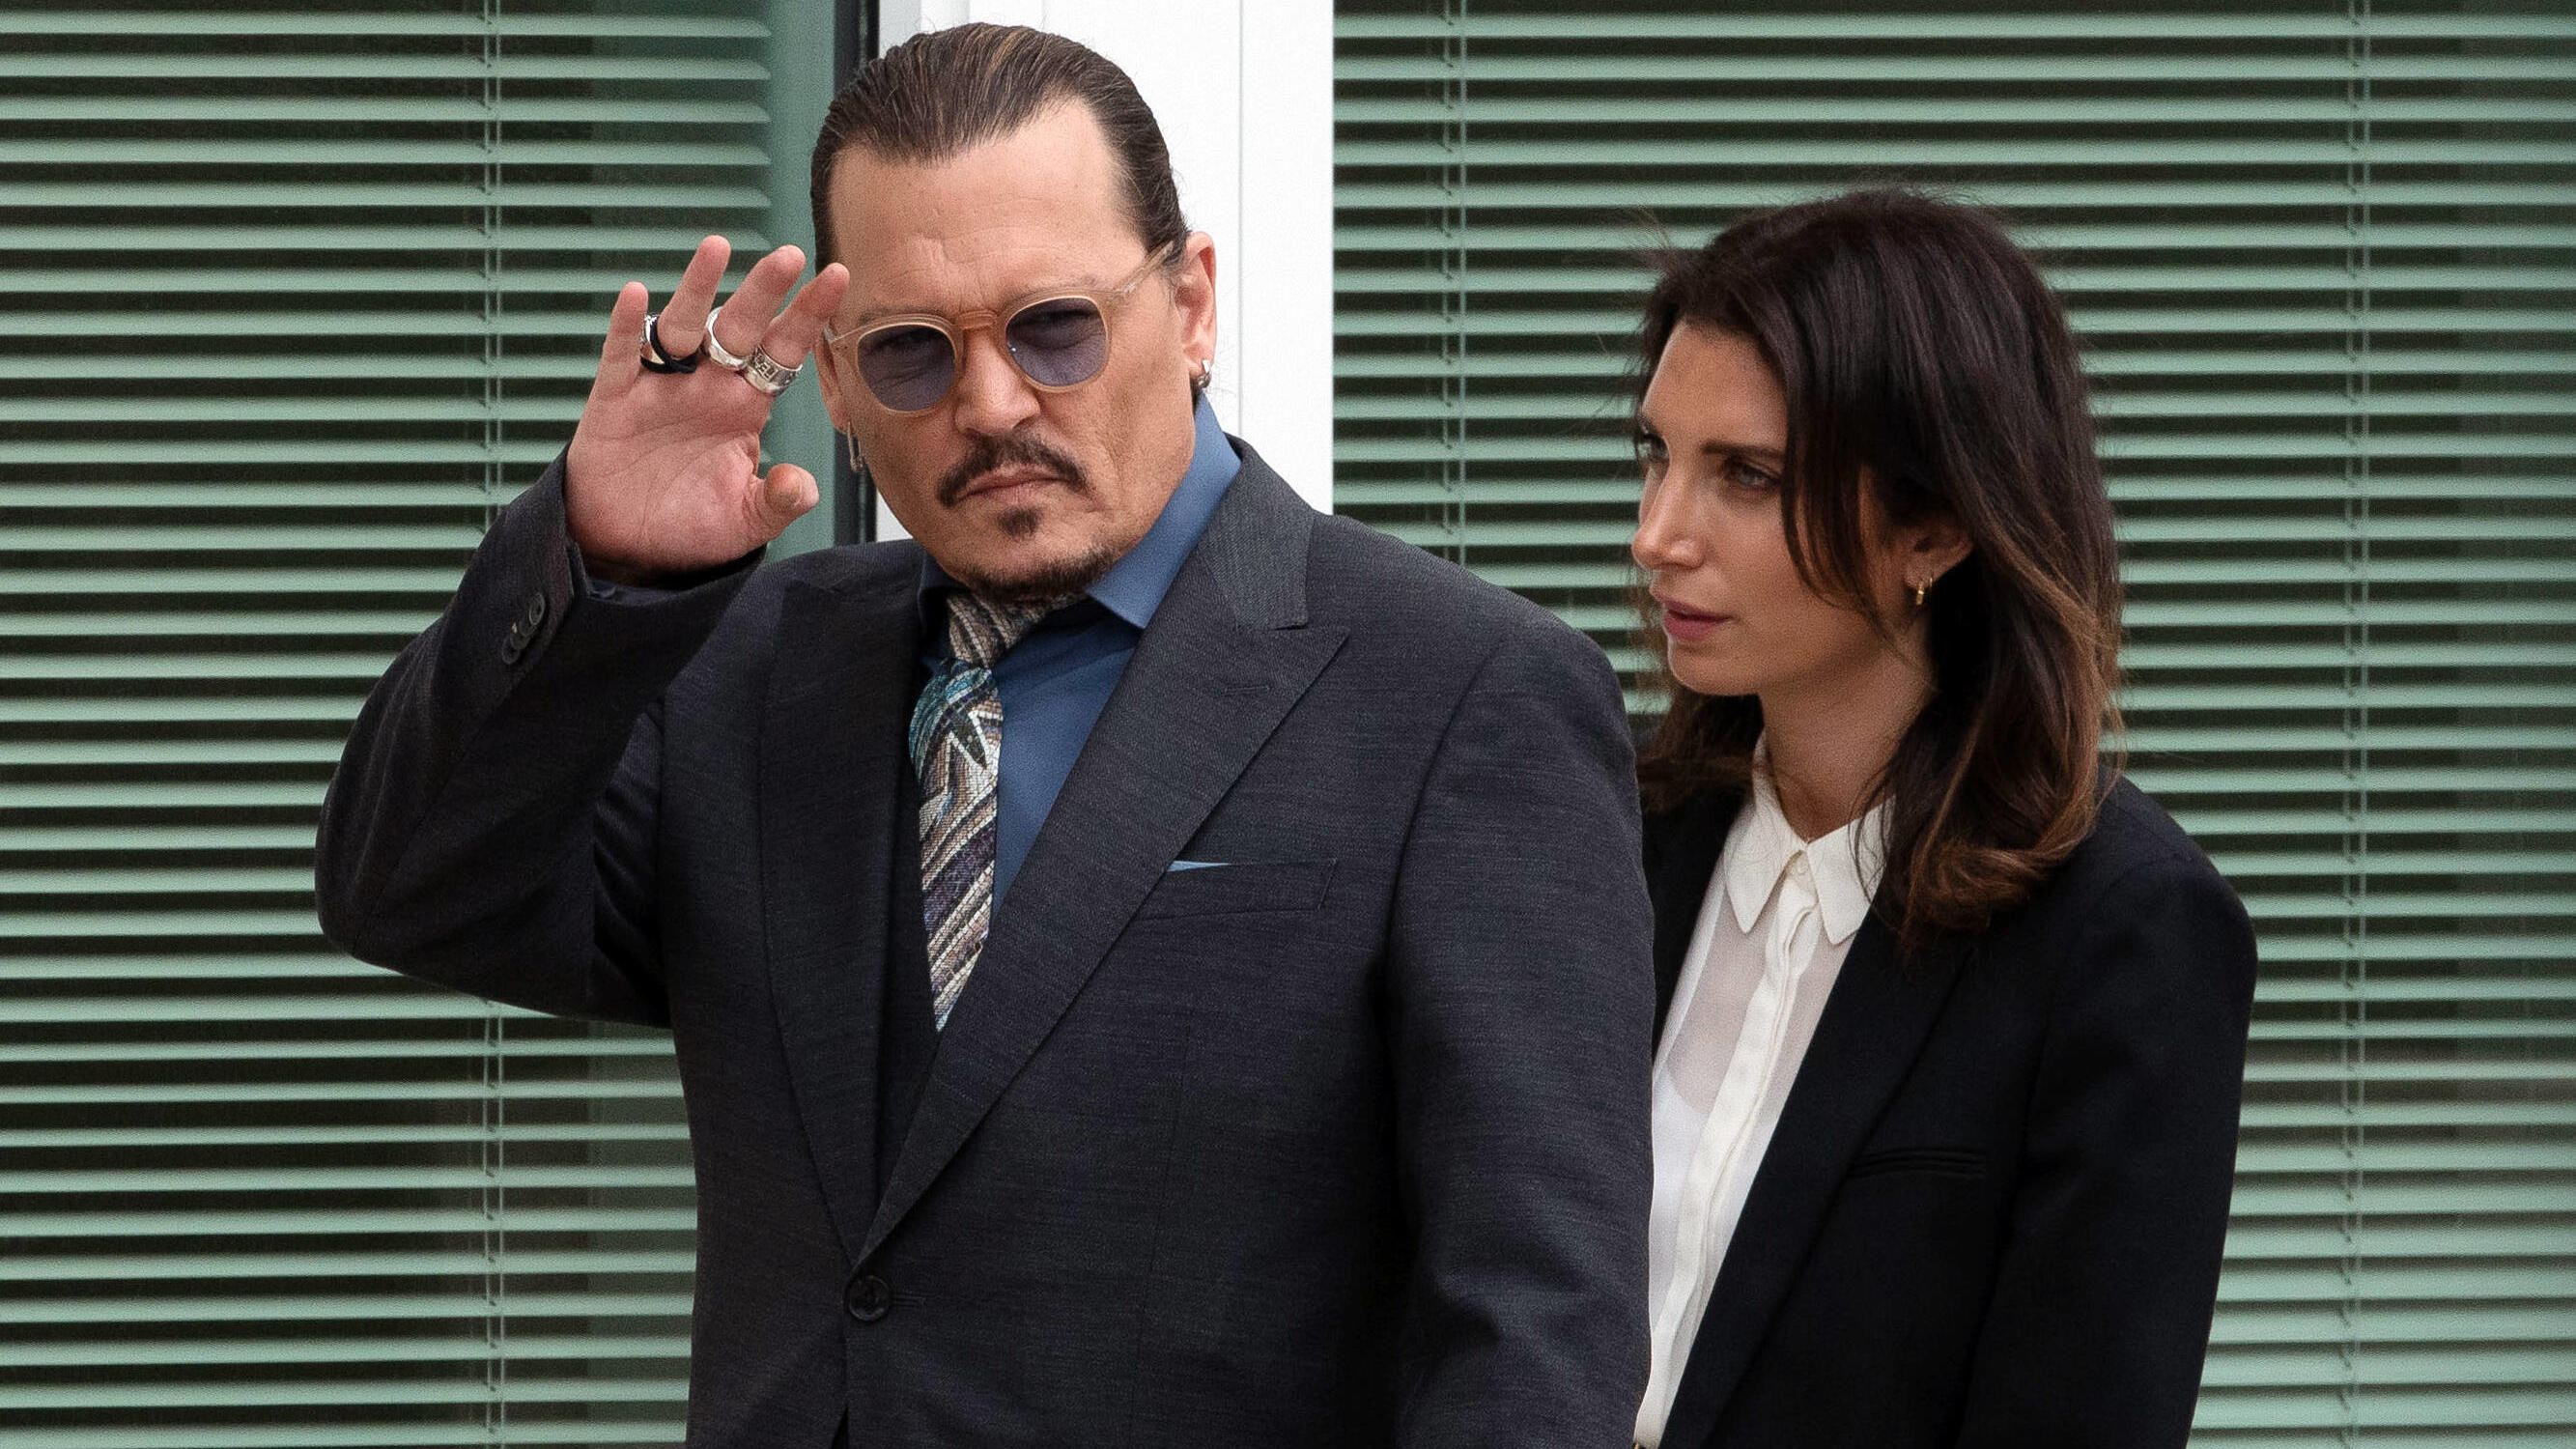  Johnny Depp steps outside the Fairfax County Courthouse, in Fairfax, during a recess in the civil trial between him and Amber Heard, Wednesday, May 25, 2022. Depp brought a defamation lawsuit against his former wife, actress Amber Heard, after she w